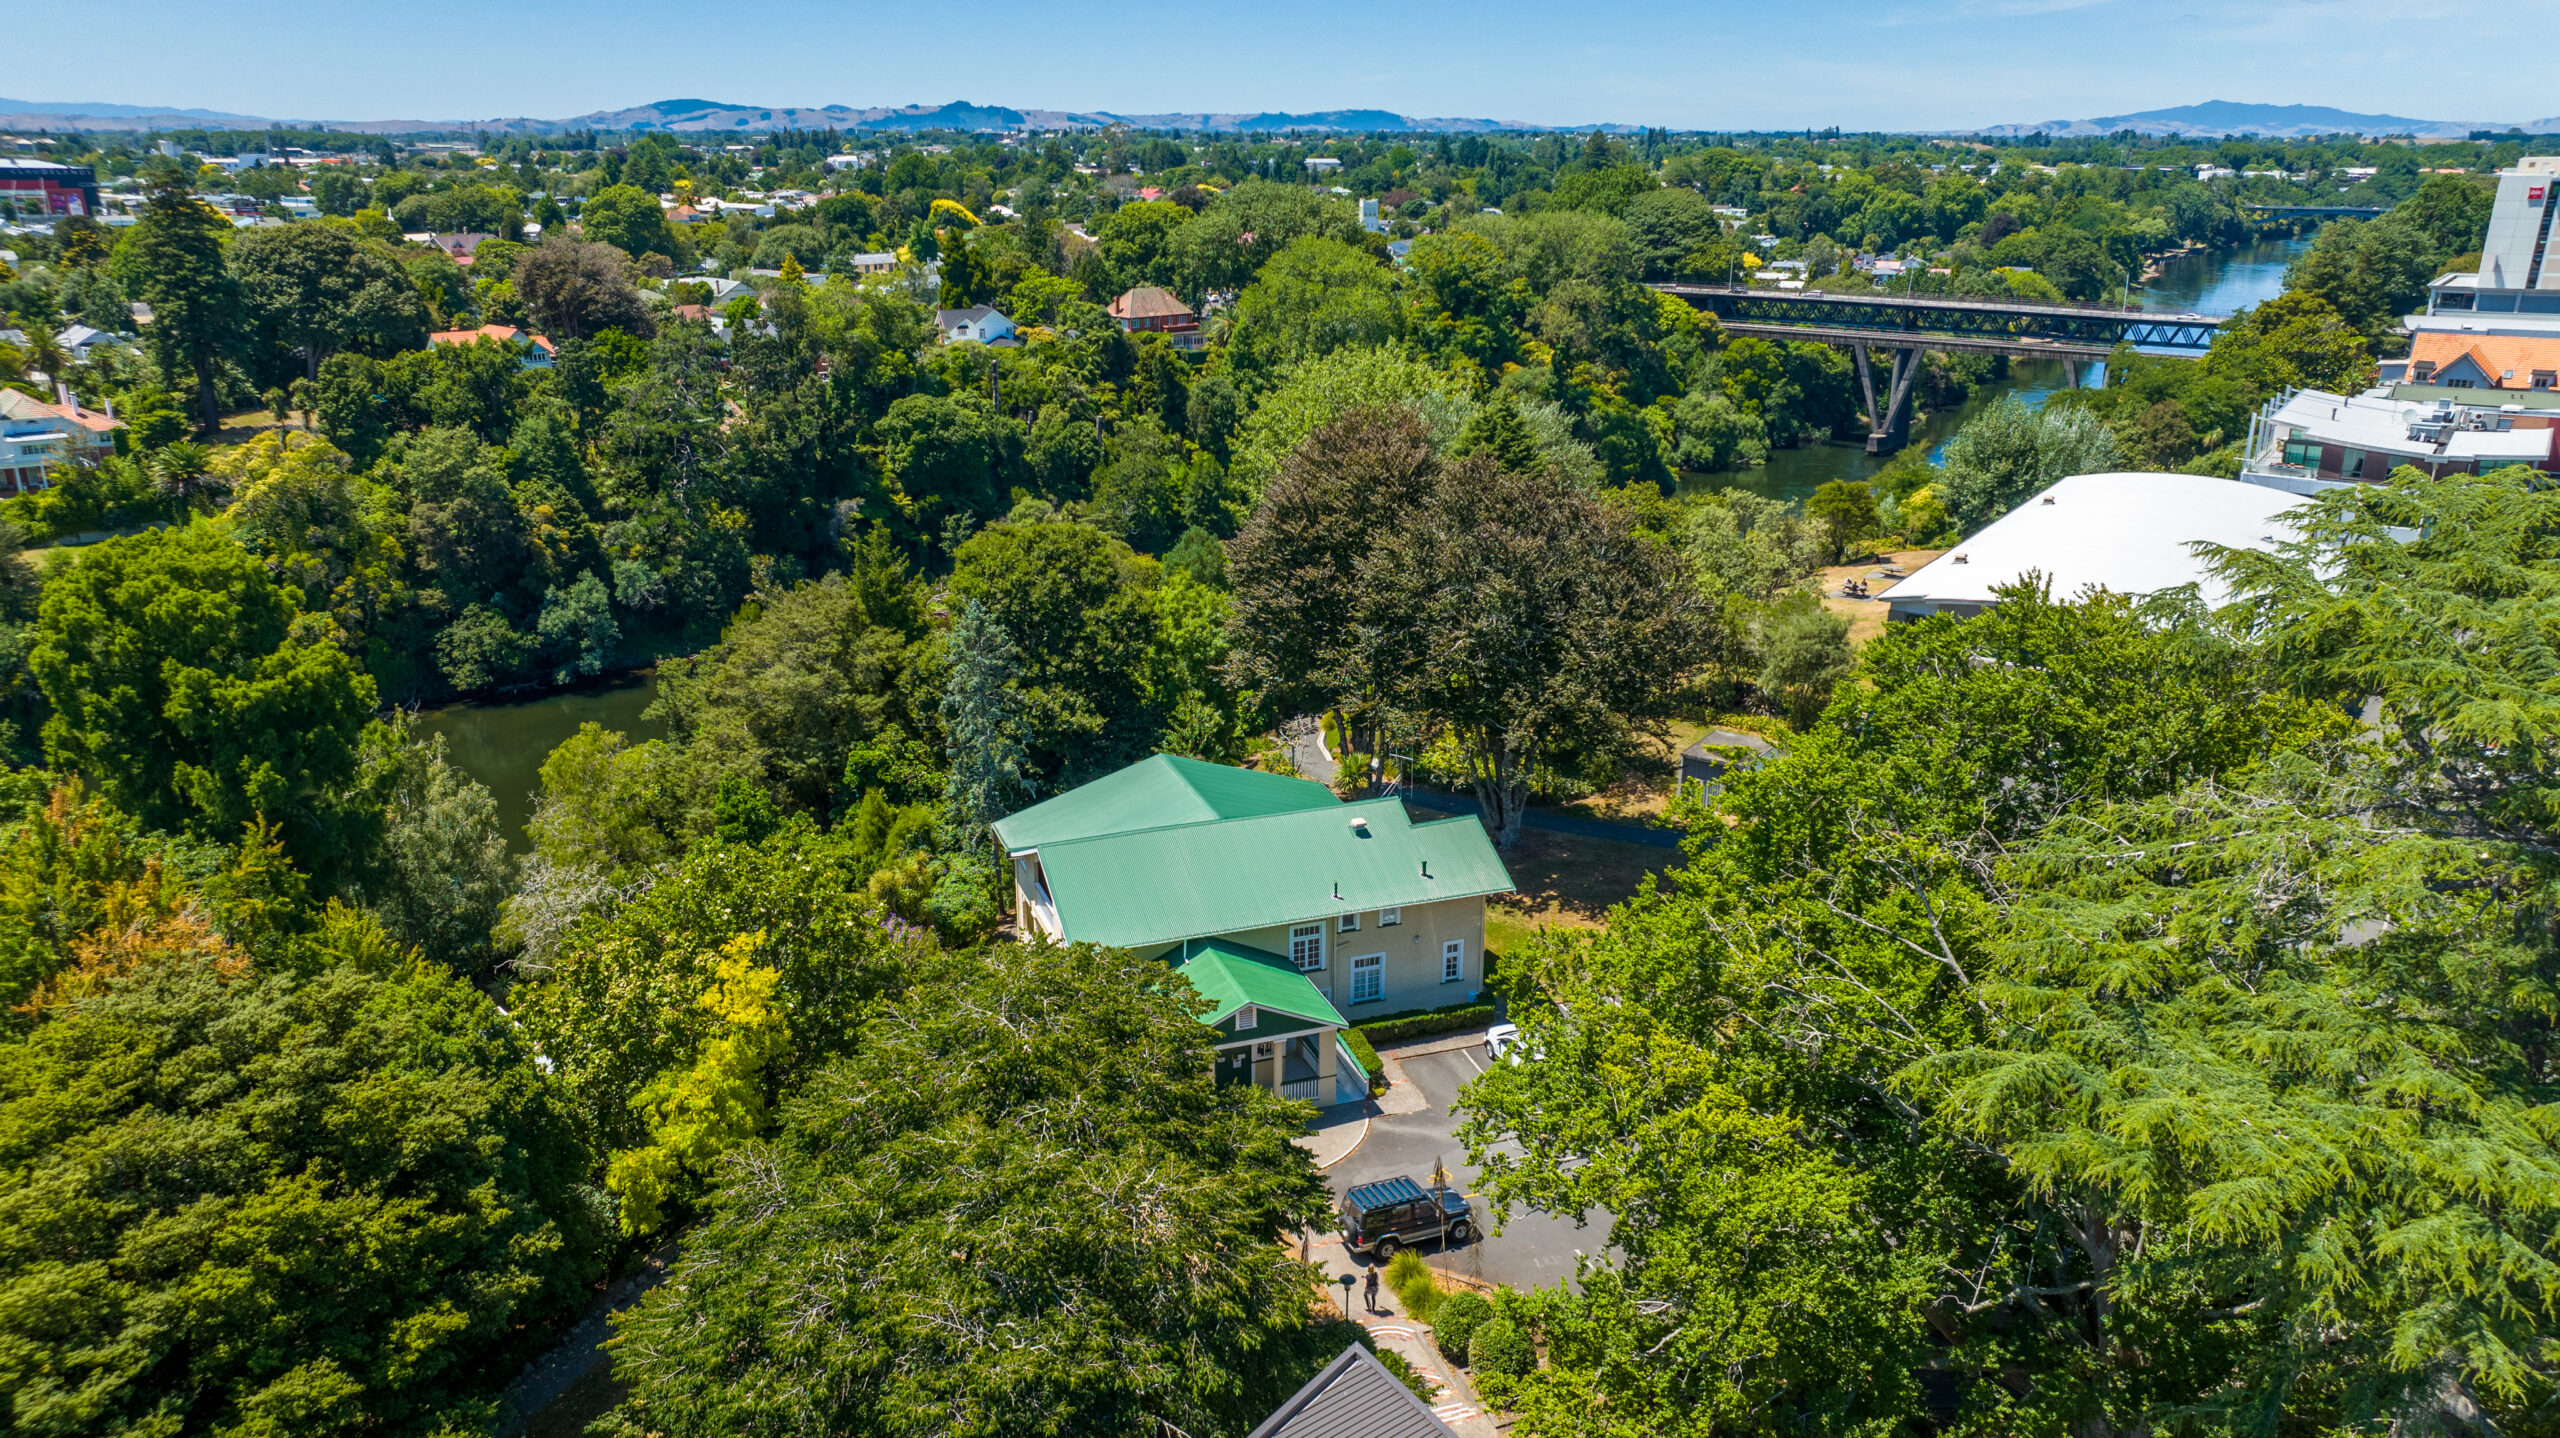 Aerial shot of the Trust Waikato office, Trust House, the Waikato river and surrounds